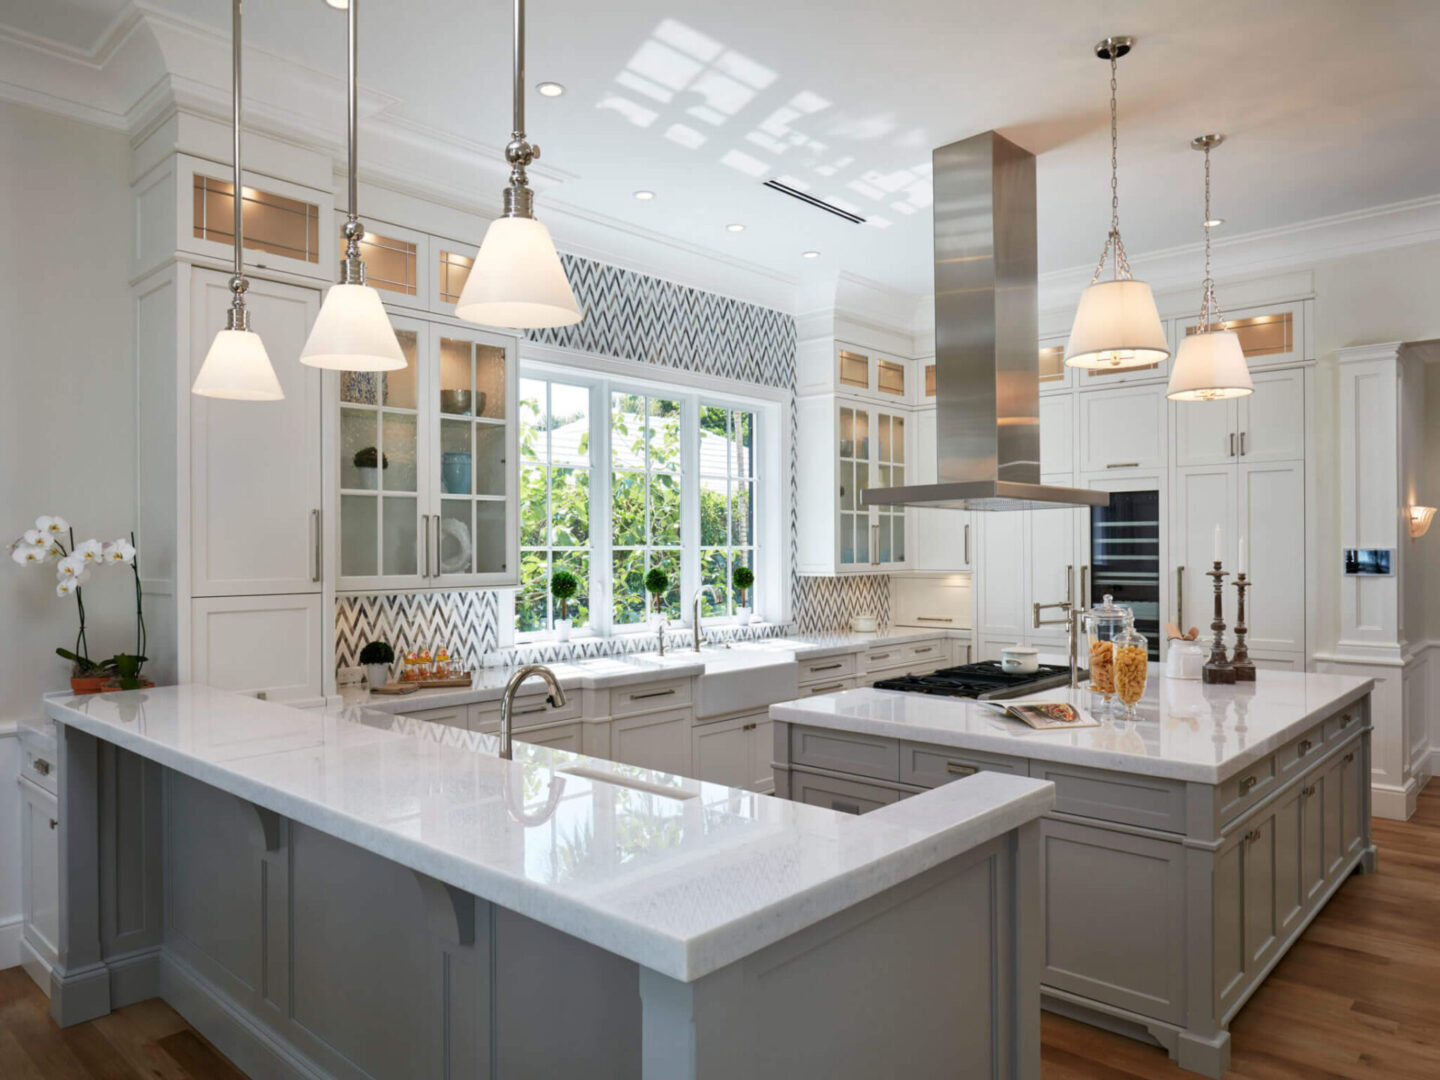 A kitchen with two large windows and white counters.